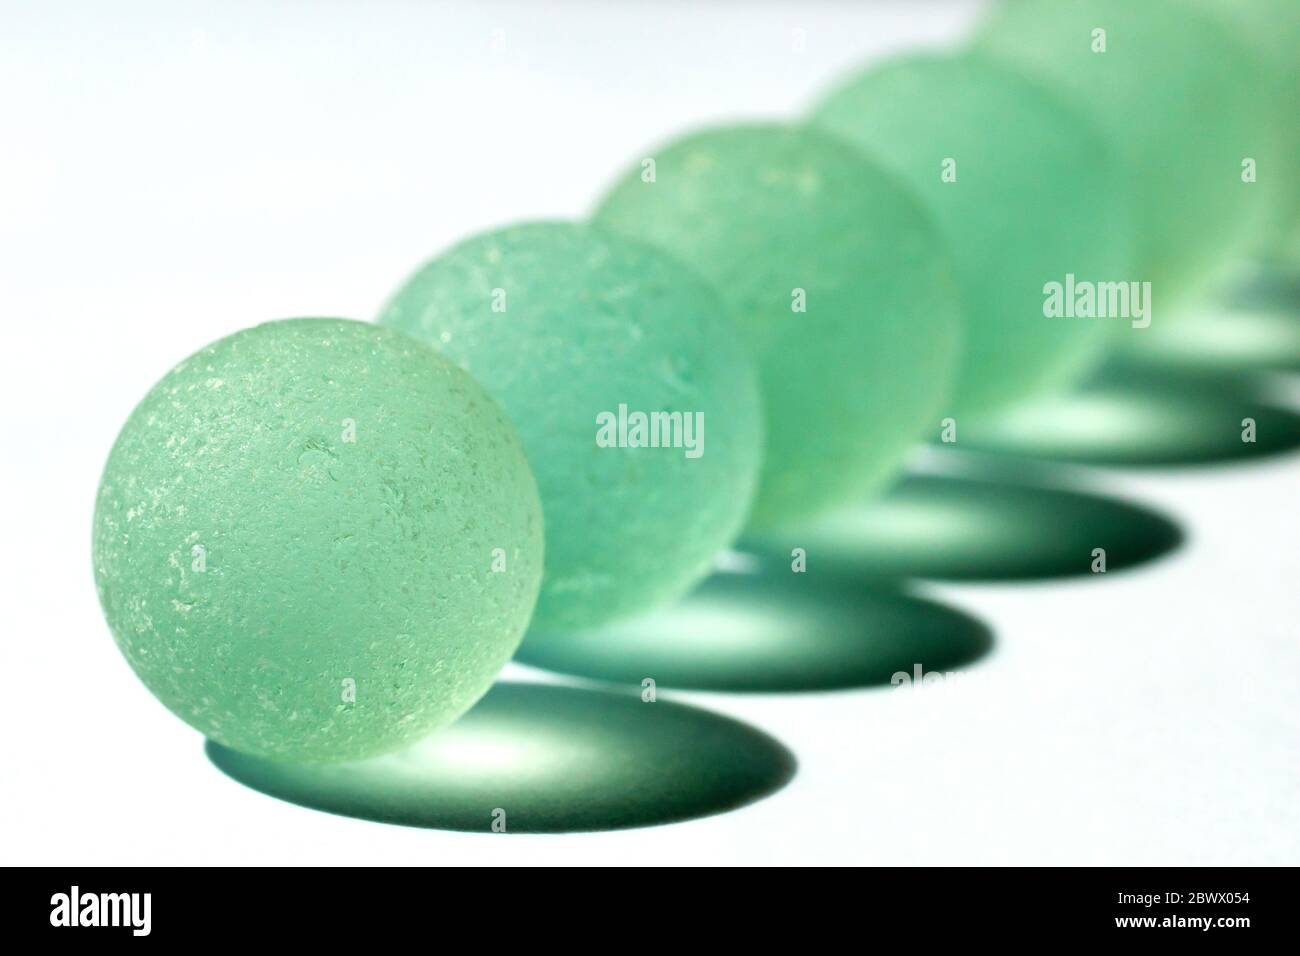 Close up still life of a series of pale green marbles, becoming less focused as they retreat into the distance. Stock Photo